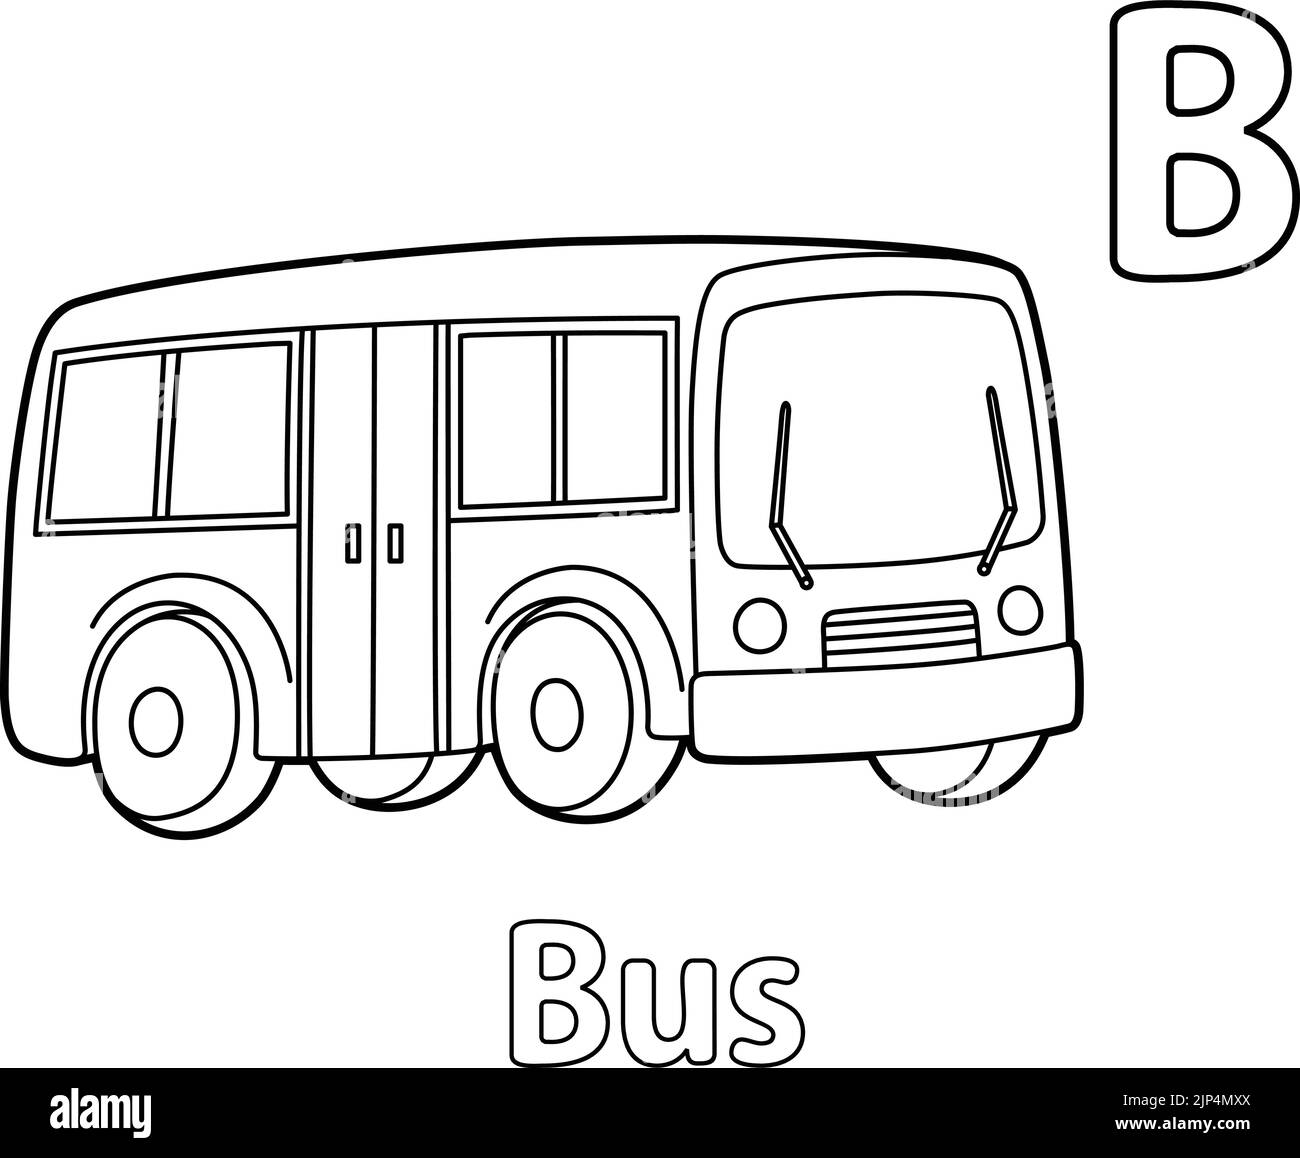 Bus Alphabet ABC Coloring Page B Stock Vector